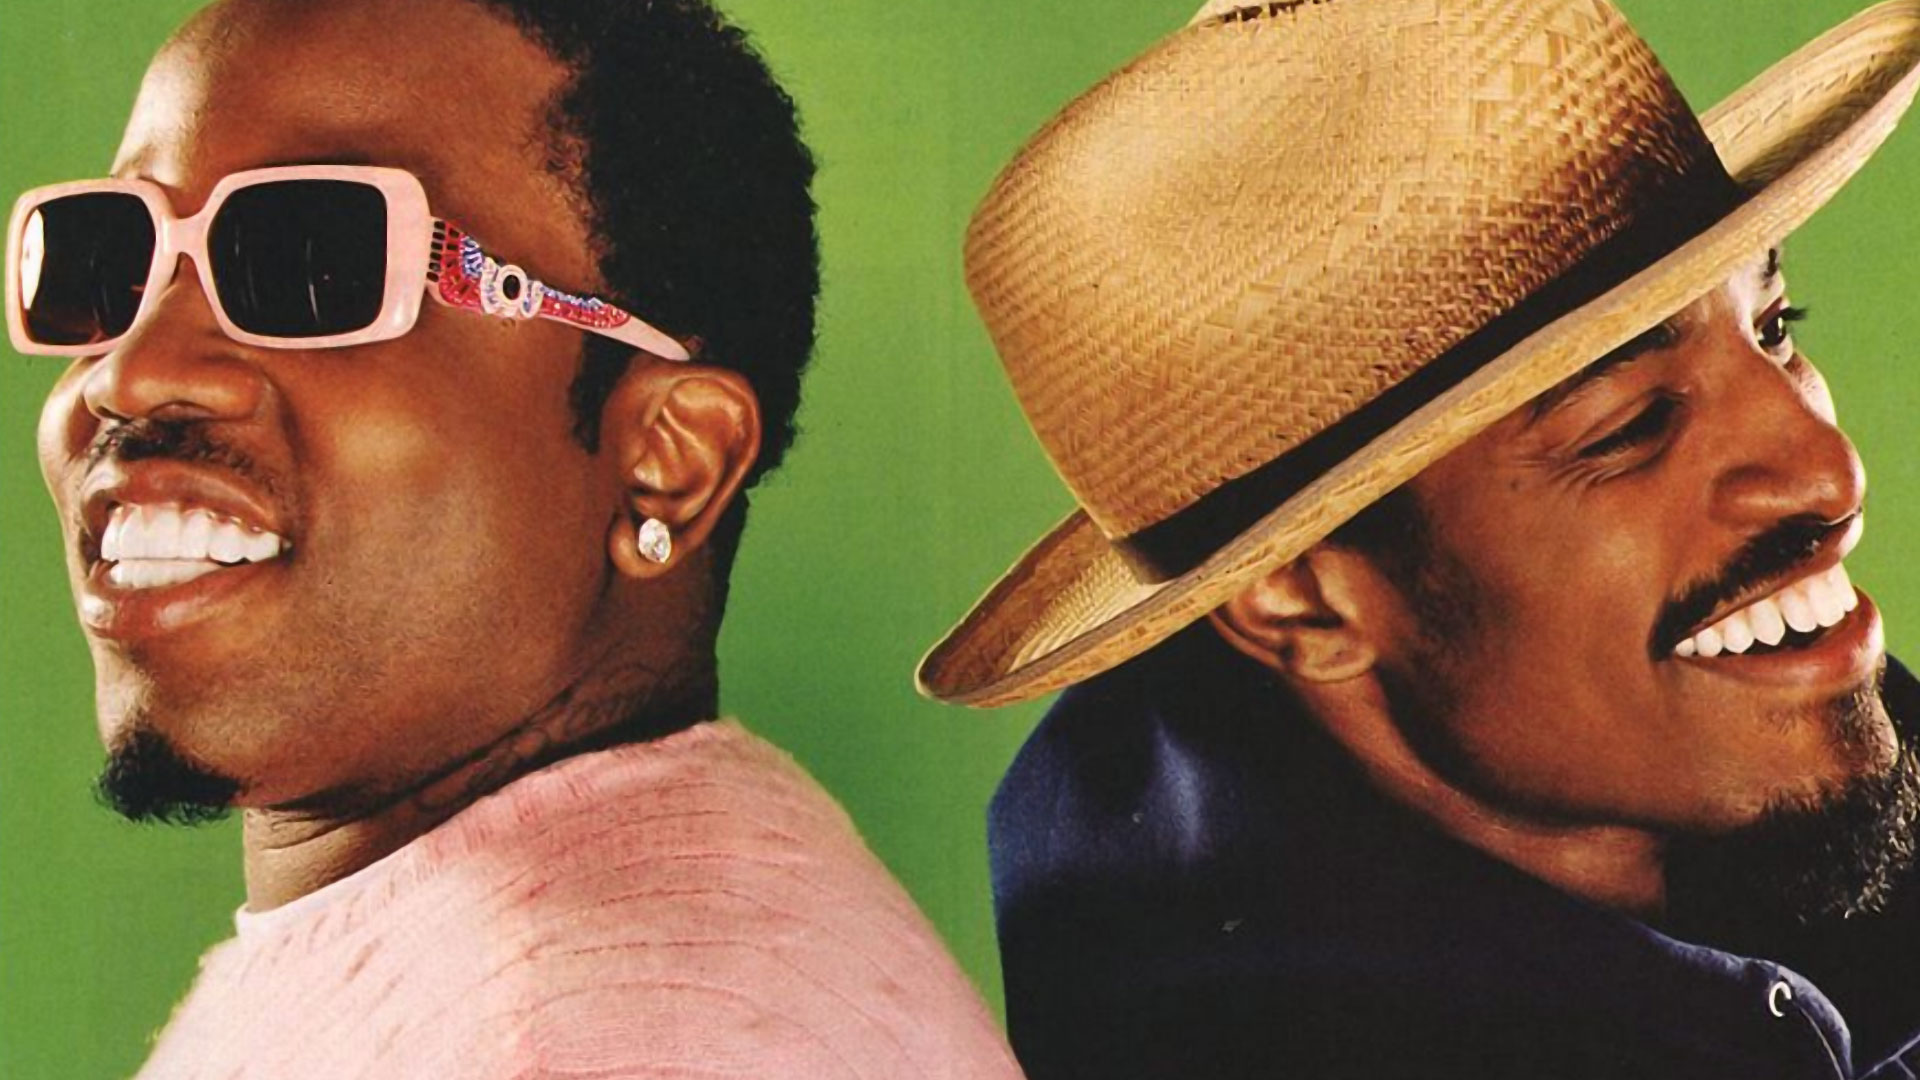 OutKast: The Great American Band?